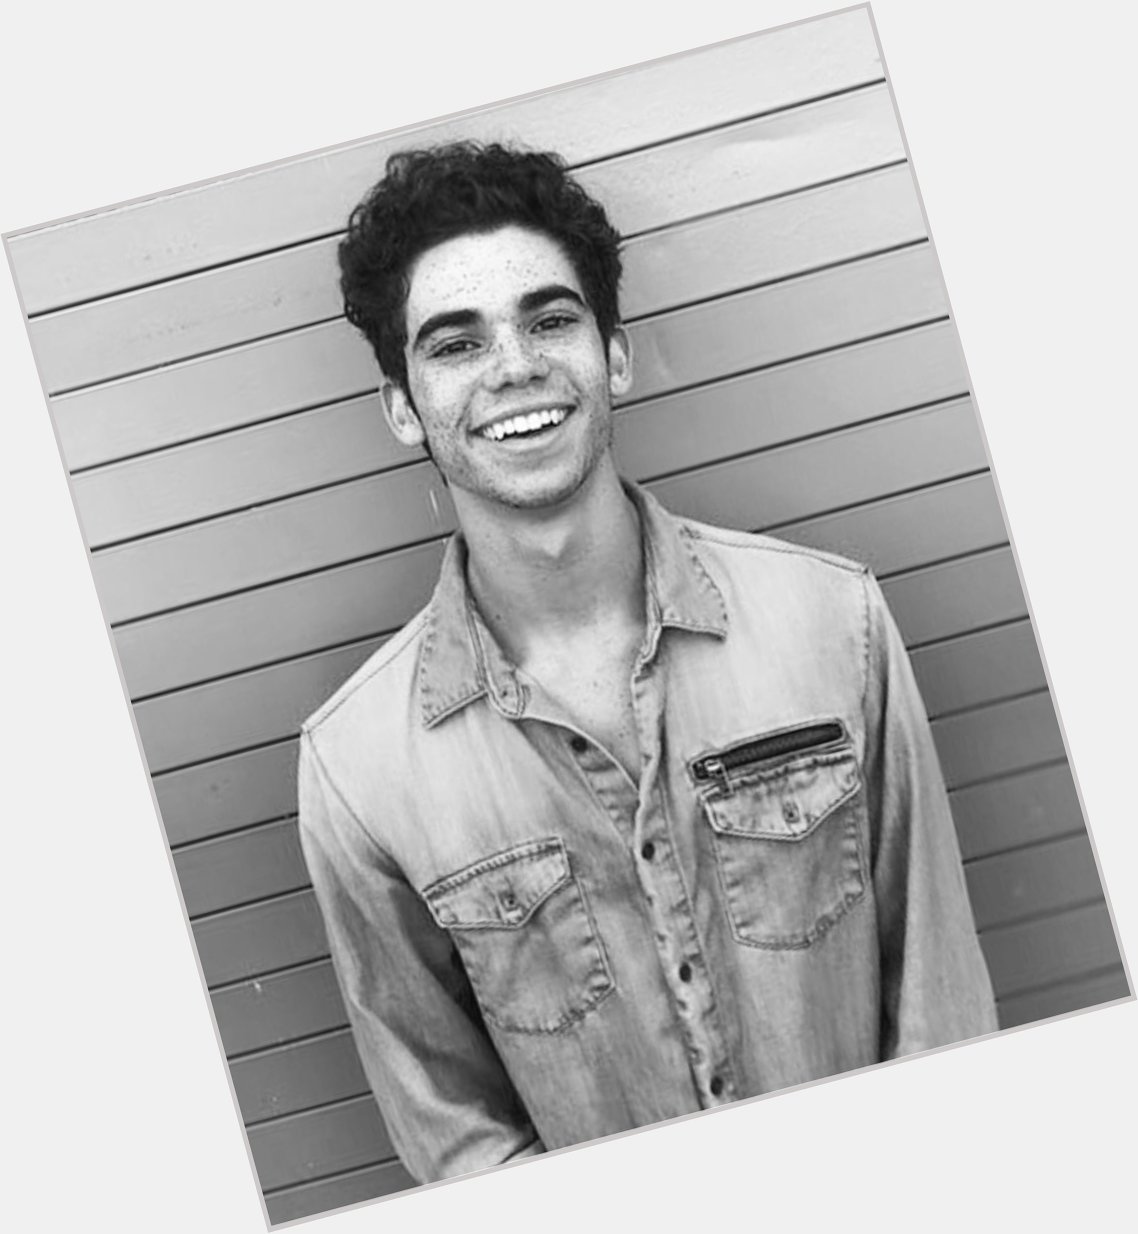 Happy Birthday to Cameron Boyce. He would have been 21 years old   